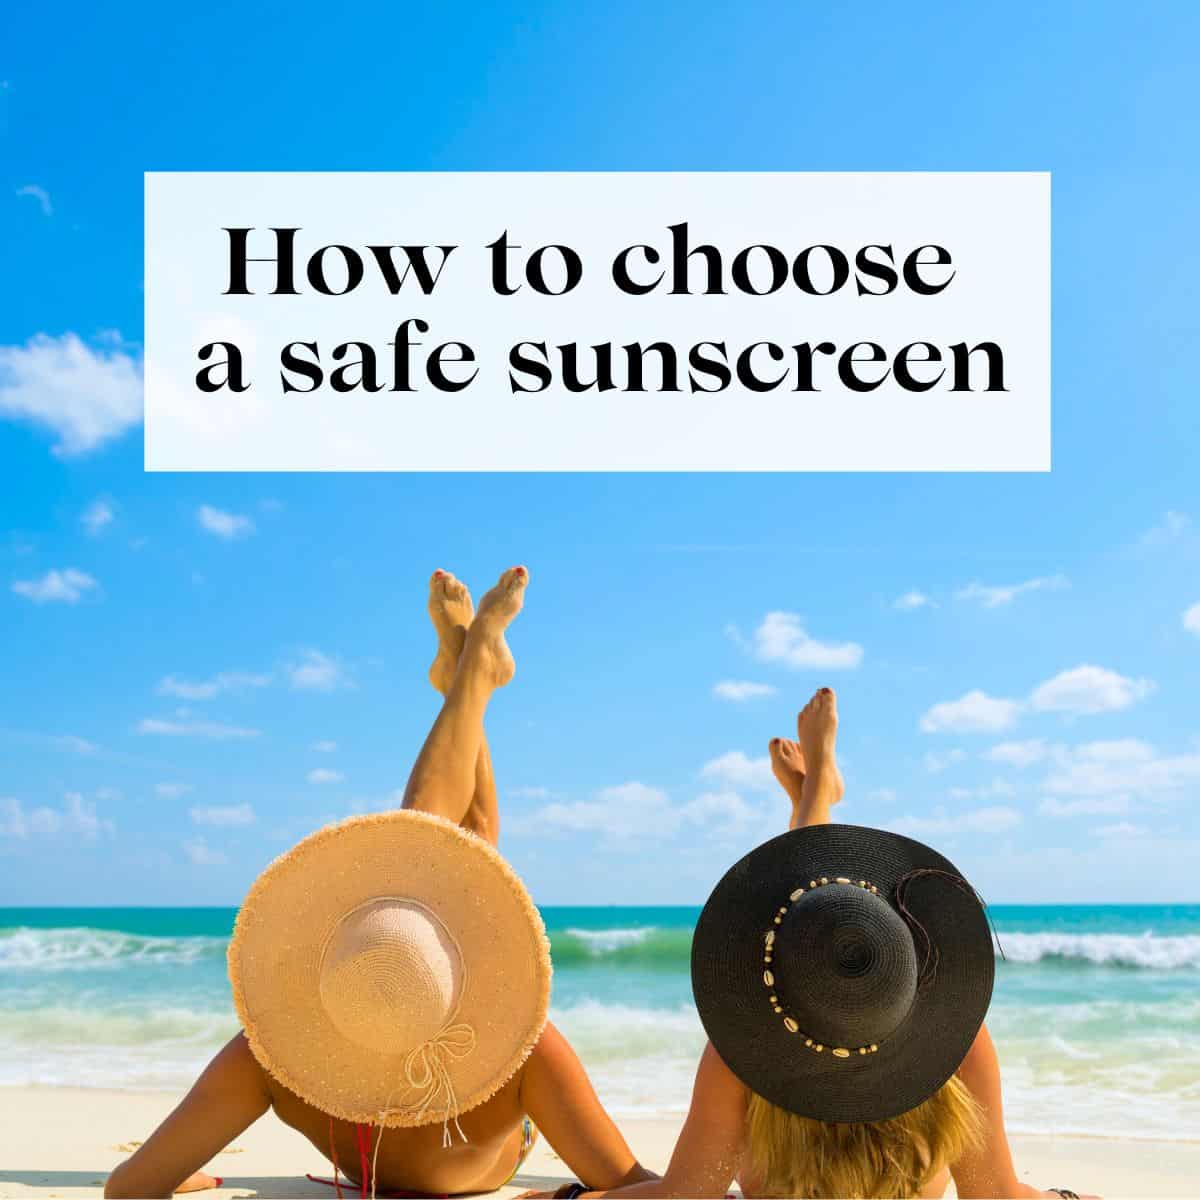 Two girls laying on the beach with their legs in the air and the title "how to choose a safe sunscreen" over them.